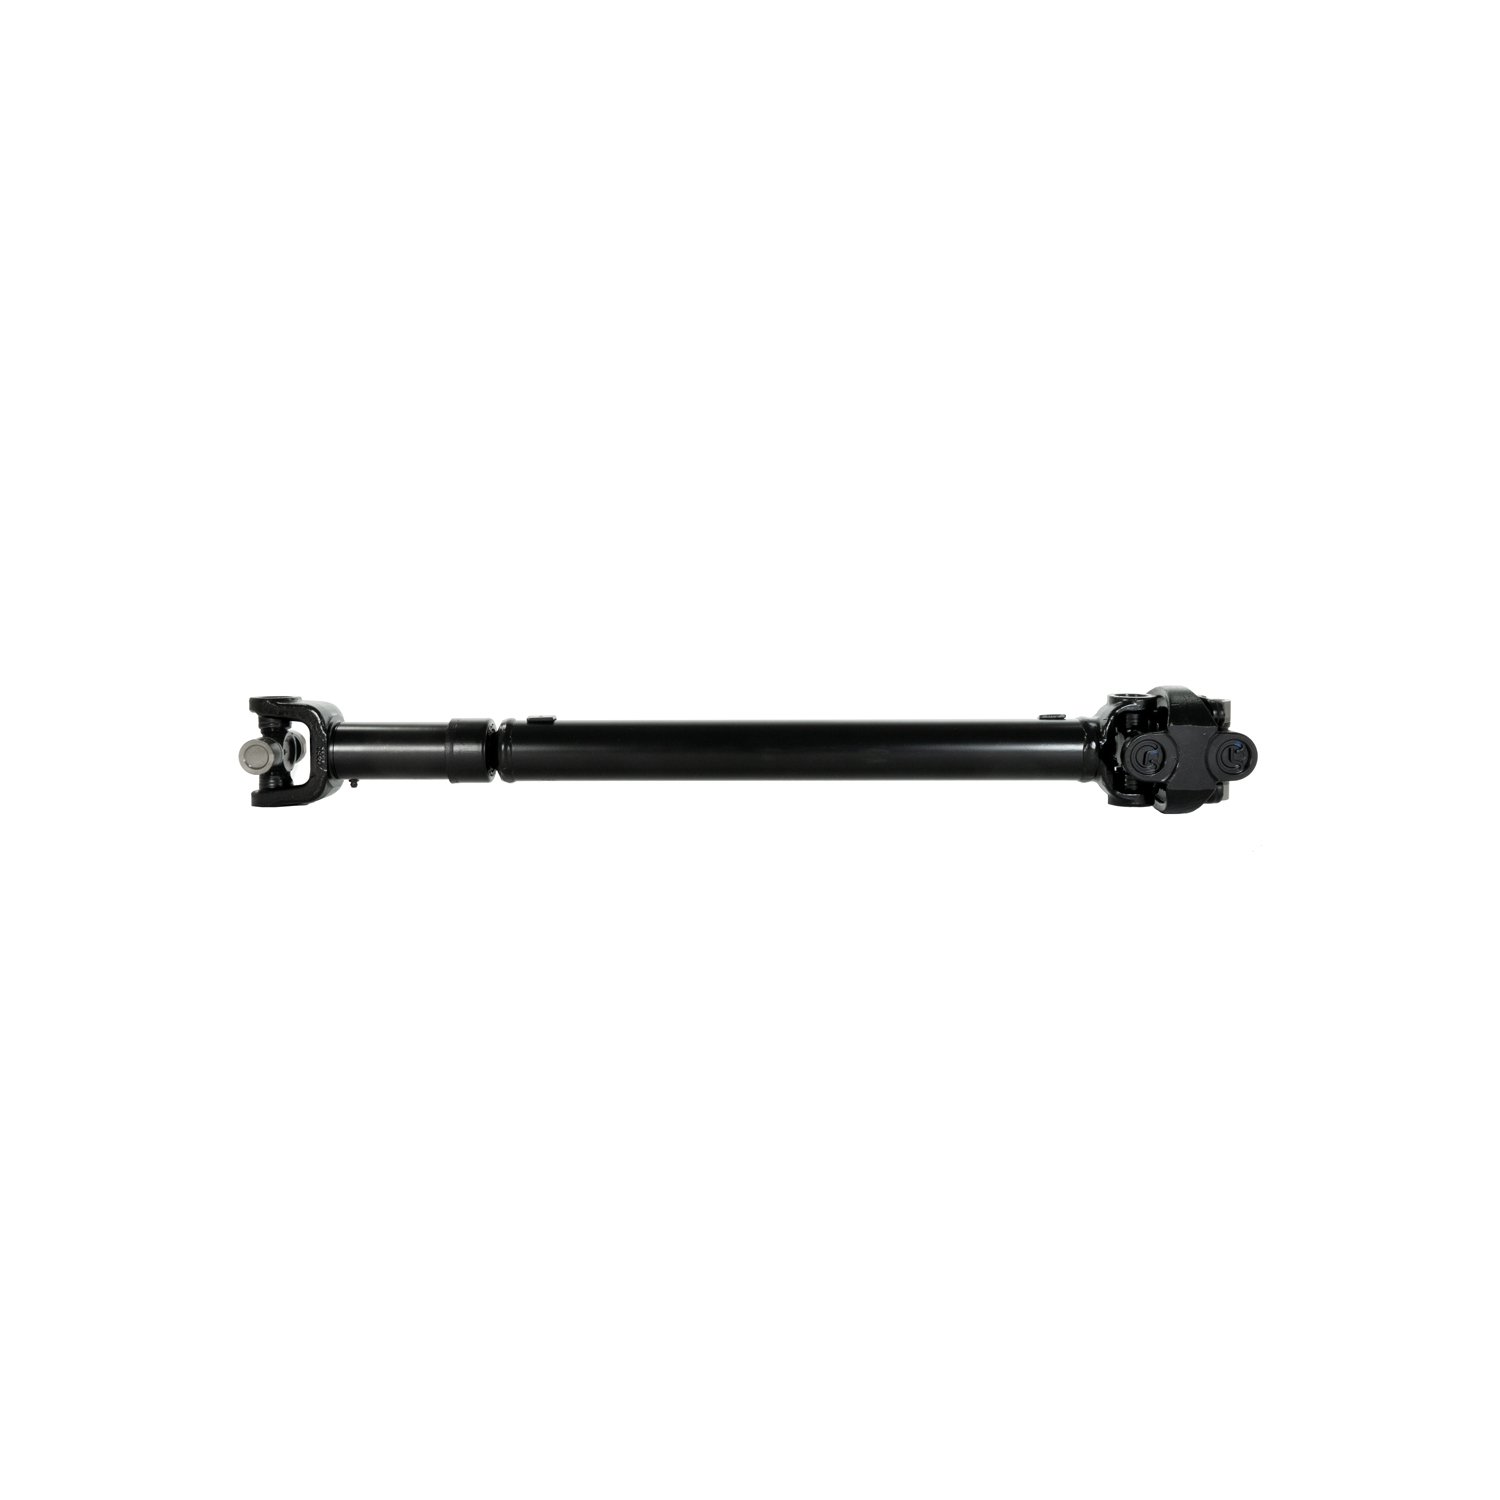 USA Standard ZDS9143 Front Driveshaft, For Jeep Cherokee, 30-5/8 in. Center-To-Center